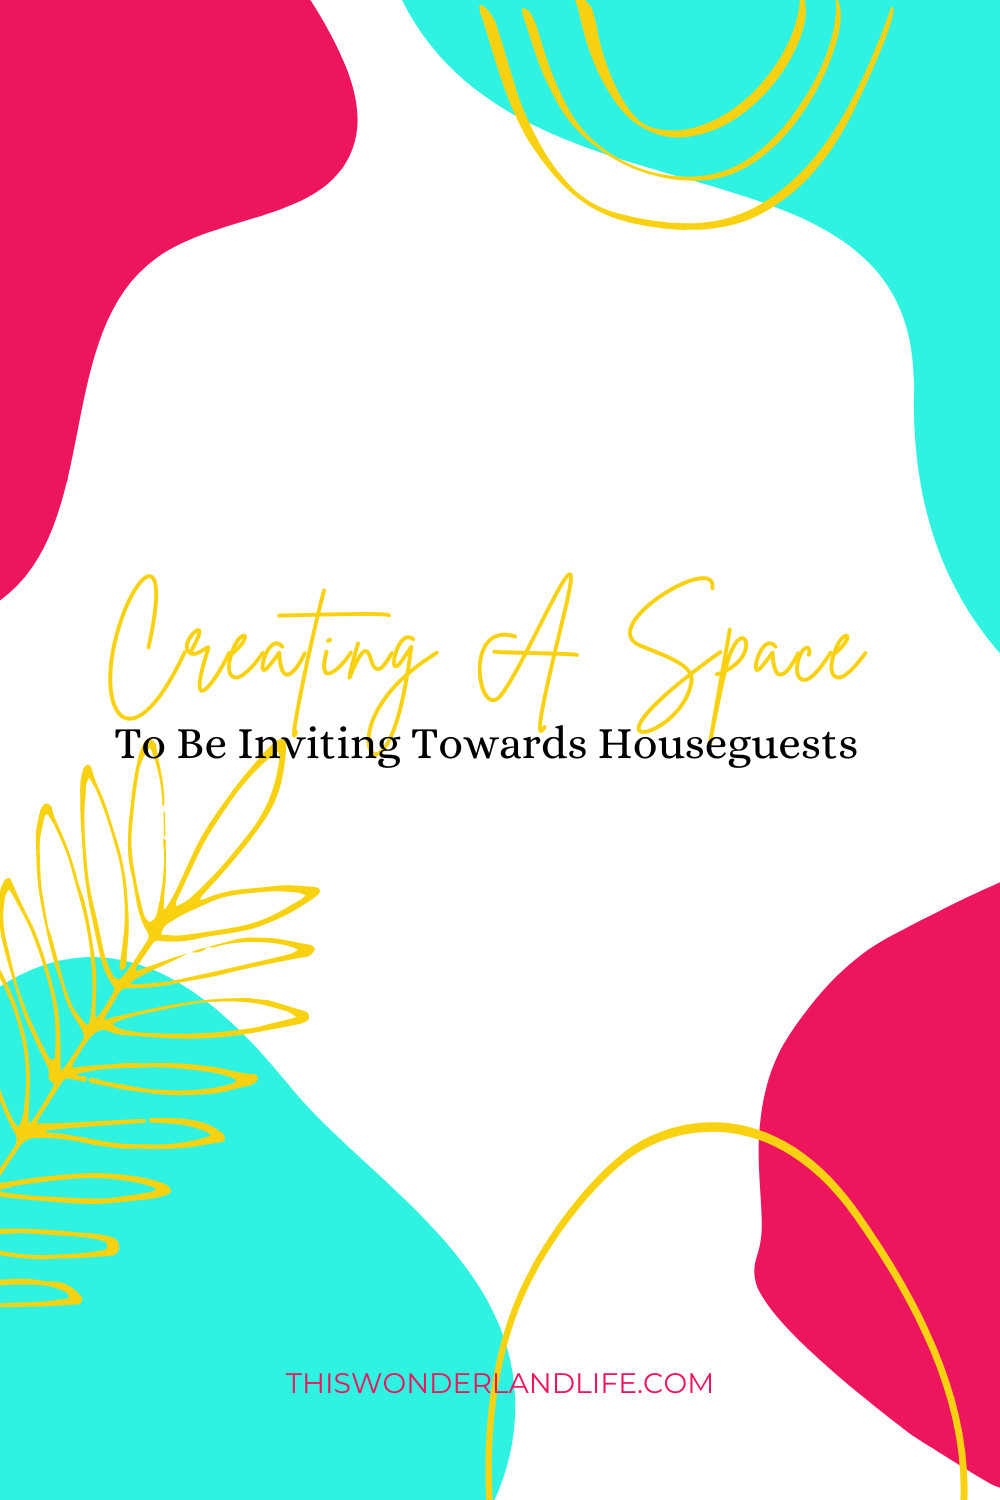 Creating A Space To Be Inviting Towards Houseguests